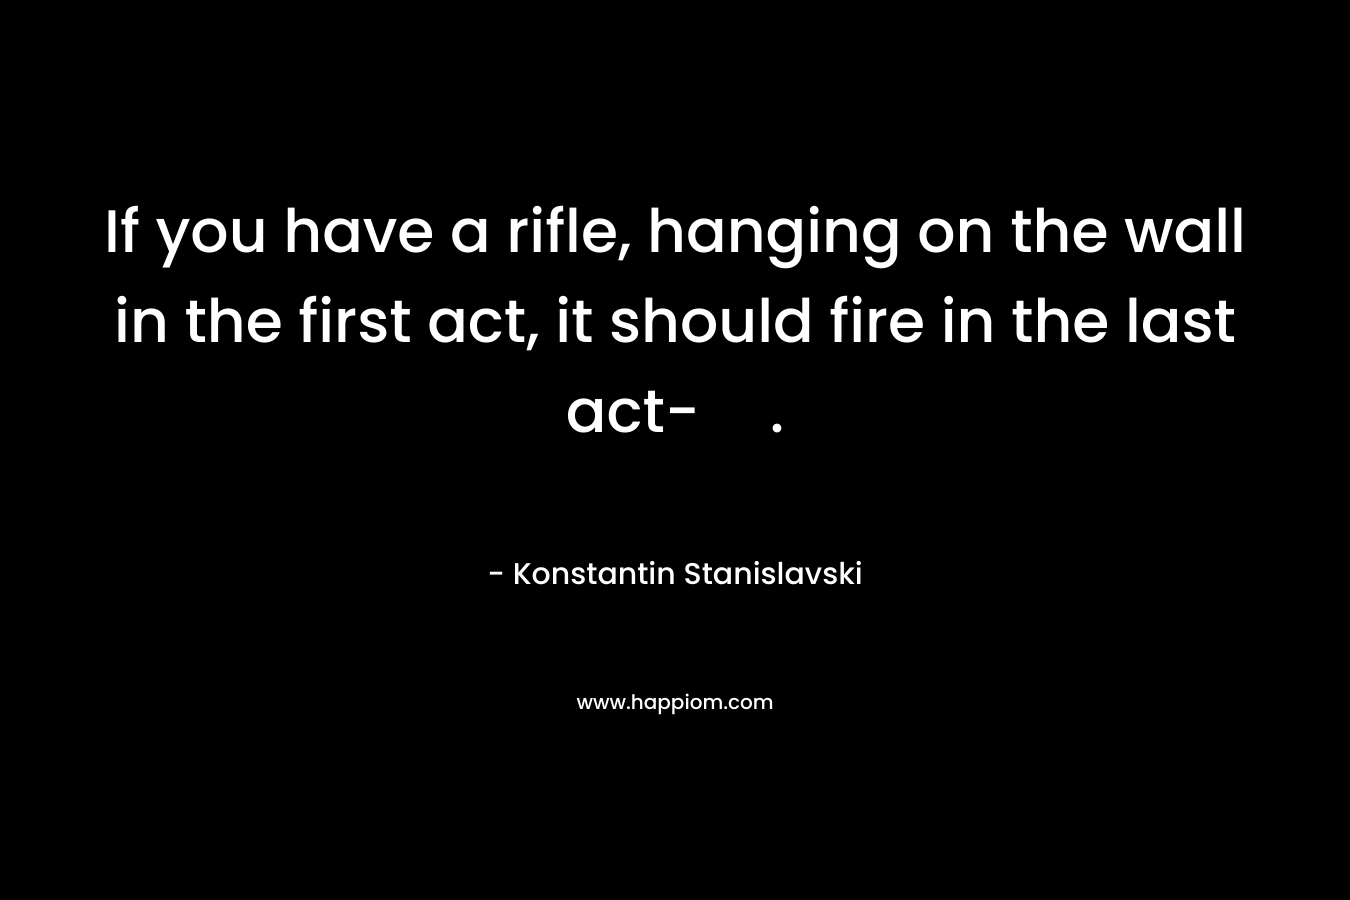 If you have a rifle, hanging on the wall in the first act, it should fire in the last act-. – Konstantin Stanislavski